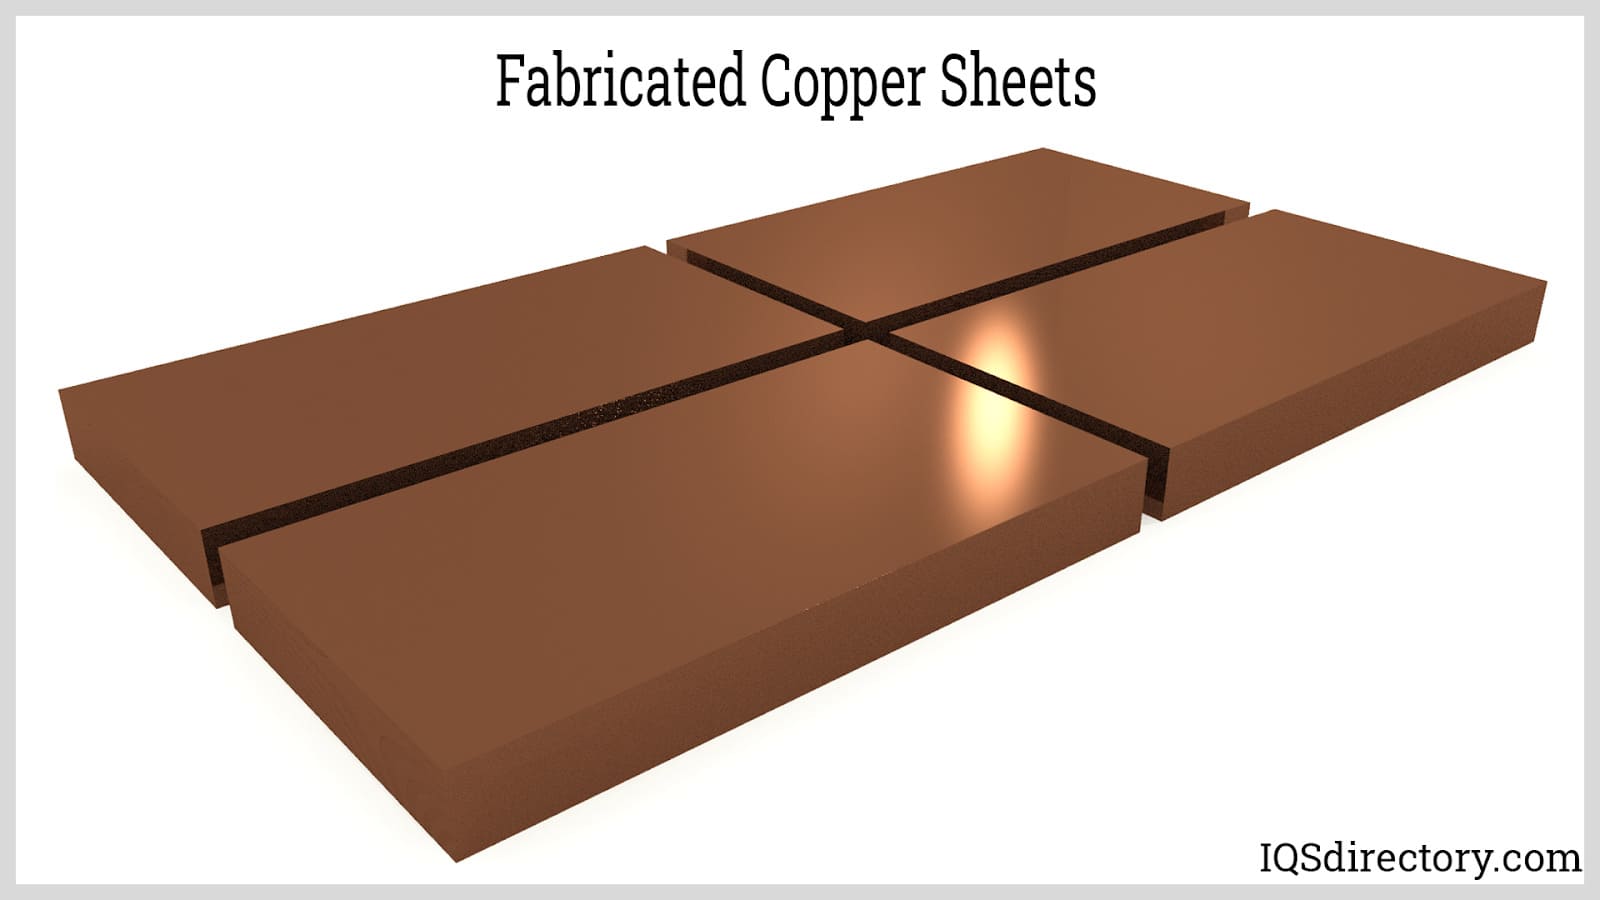 Fabricated Copper Sheets